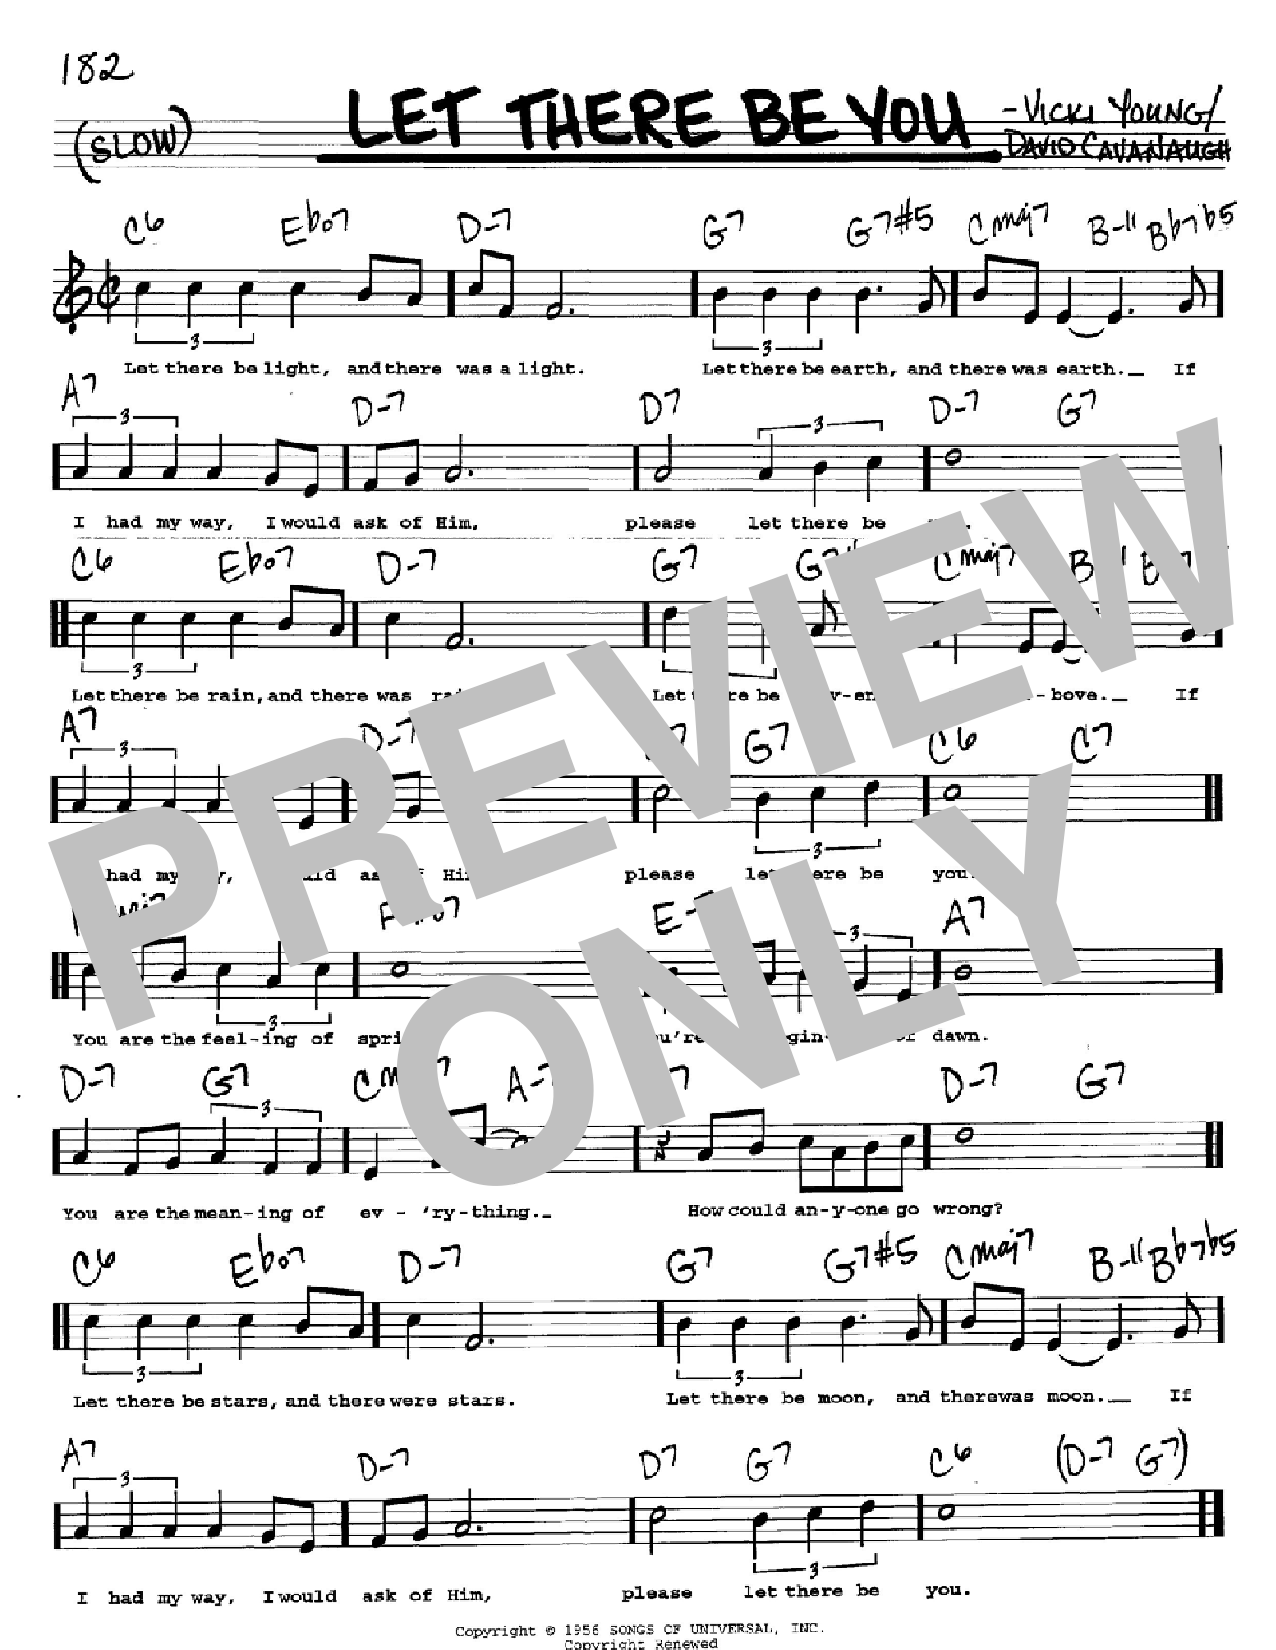 Download Vicki Young Let There Be You Sheet Music